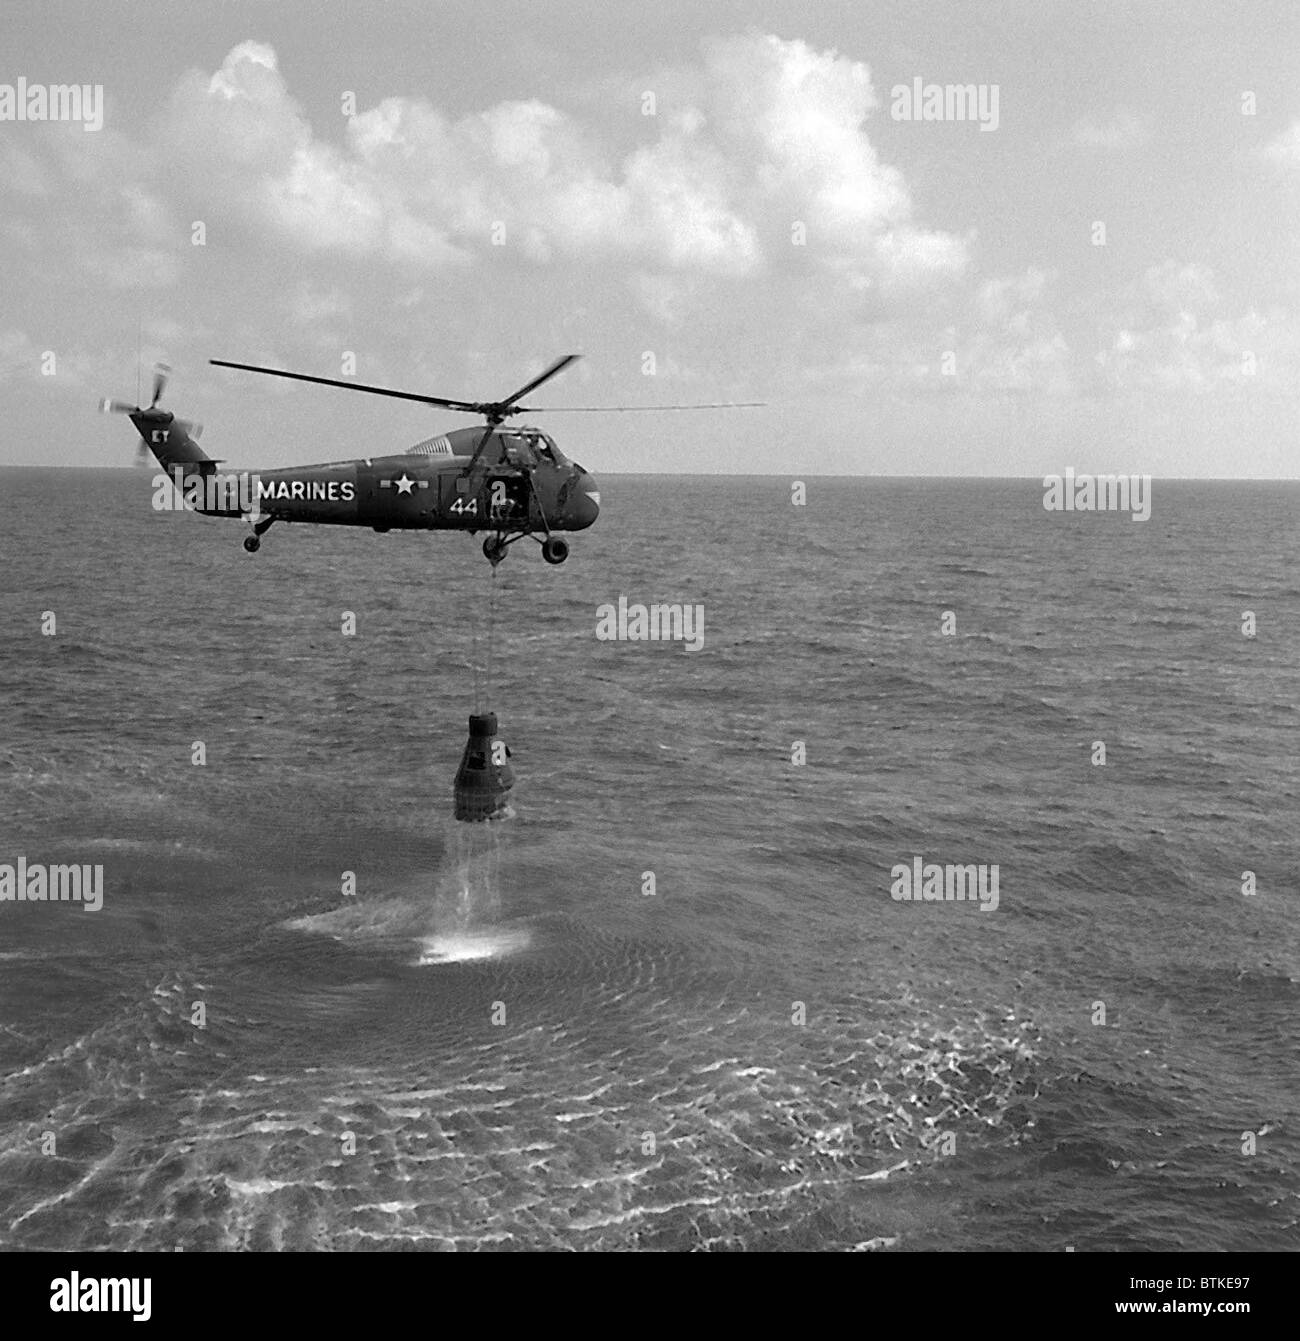 After splashdown recovery of the Freedom 7 space capsule by a U.S. Marine helicopter. Freedom 7 carried placed the first American astronaut, Alan Shepard, in space for 15-1/2 minutes on May 5, 1961. Stock Photo